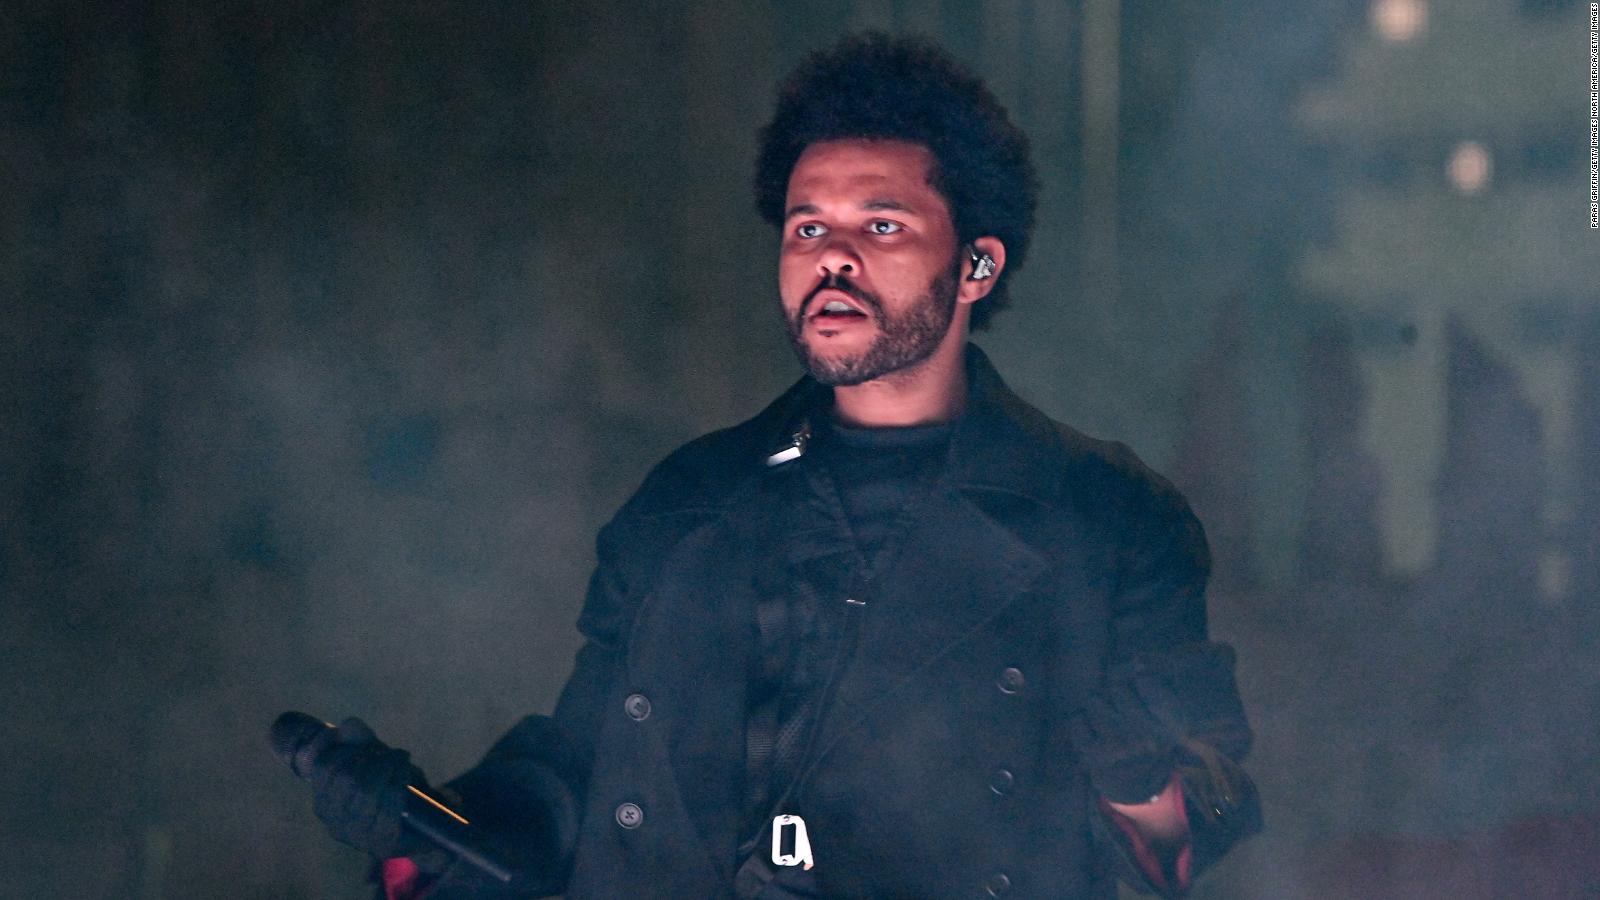 The Weeknd cancels concert and leaves the stage in full presentation